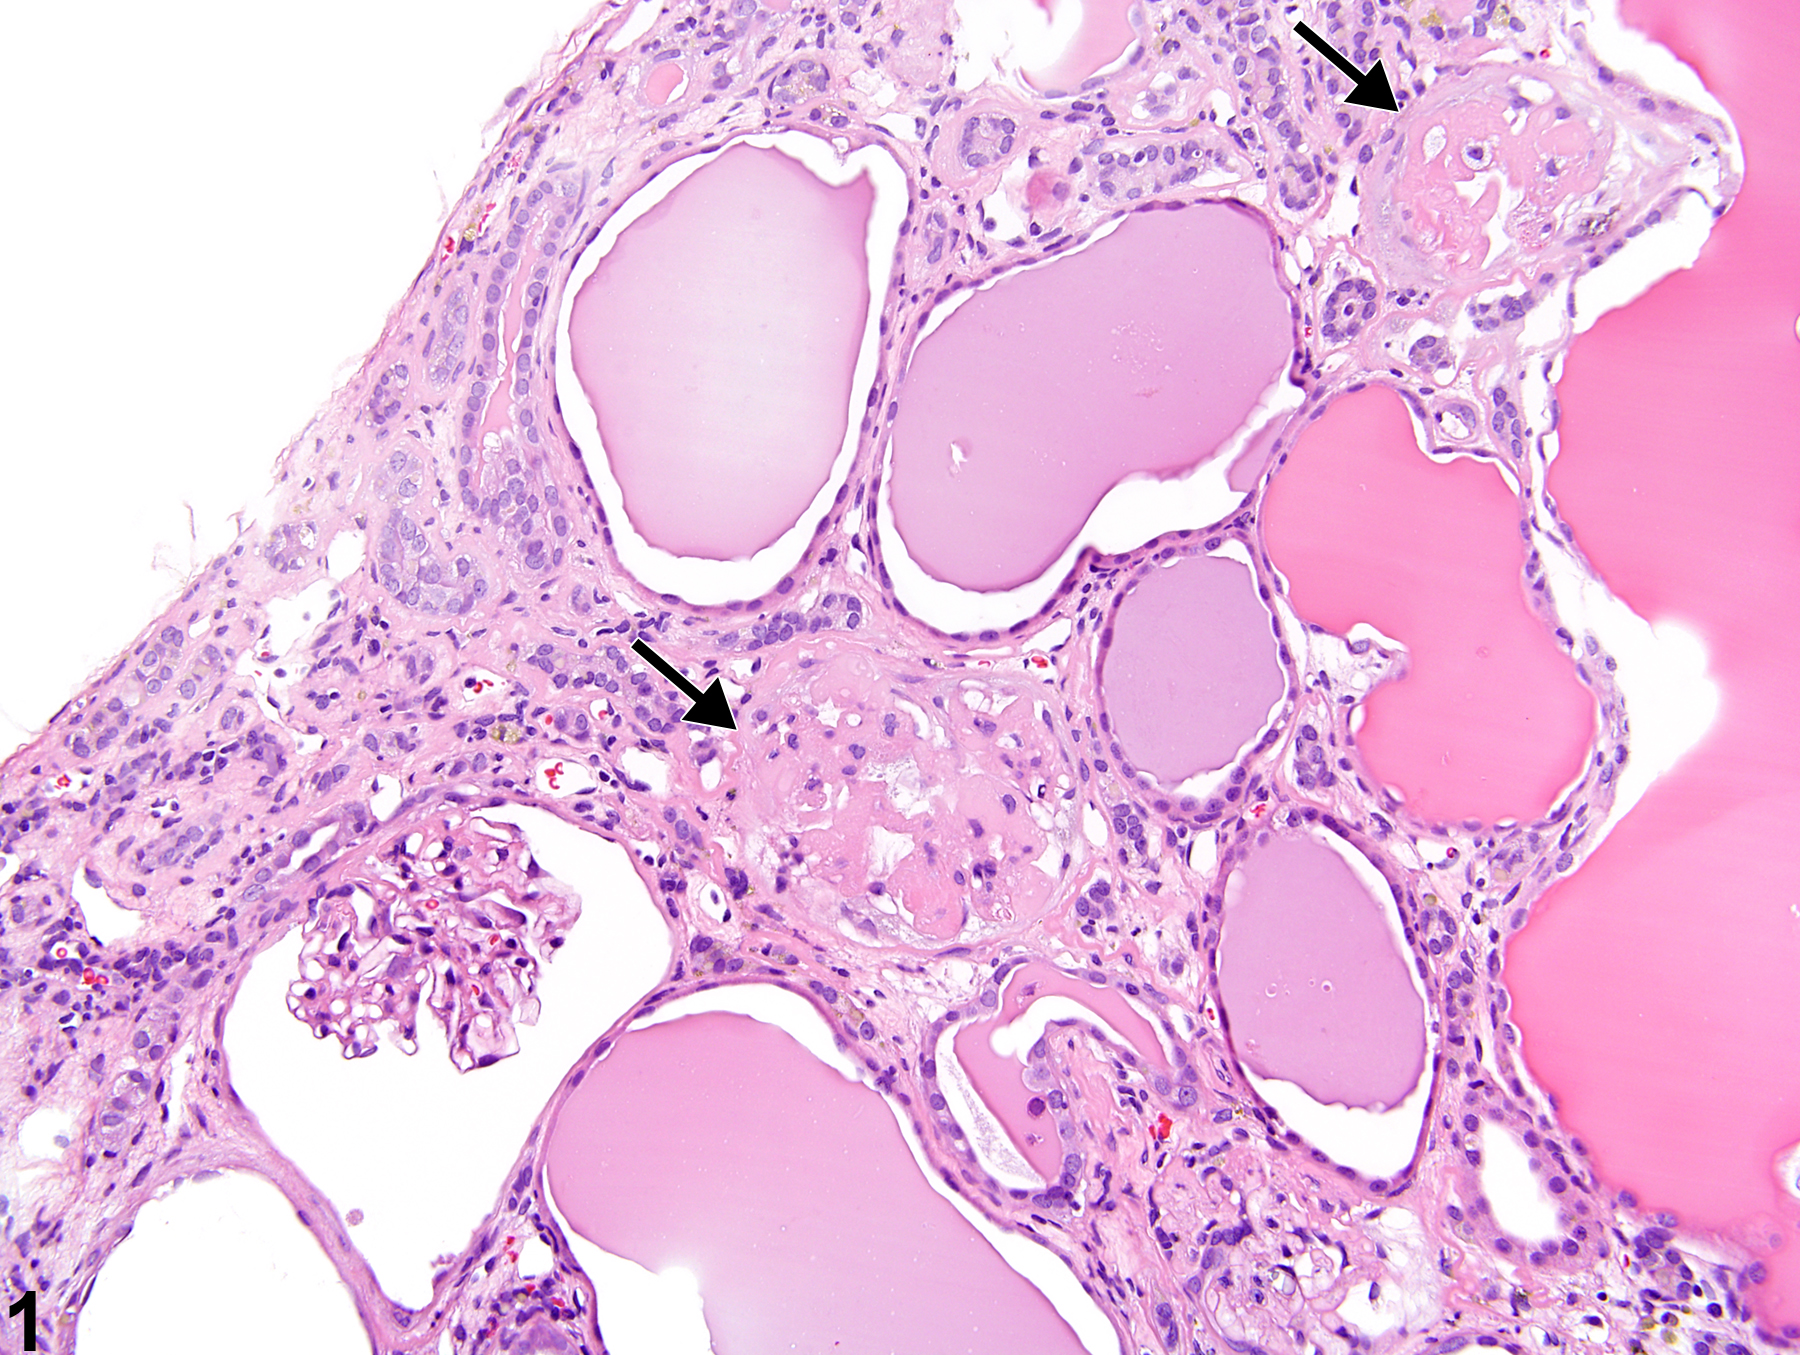 Image of glomerulosclerosis in the kidney from a male Wistar Han rat in a chronic study